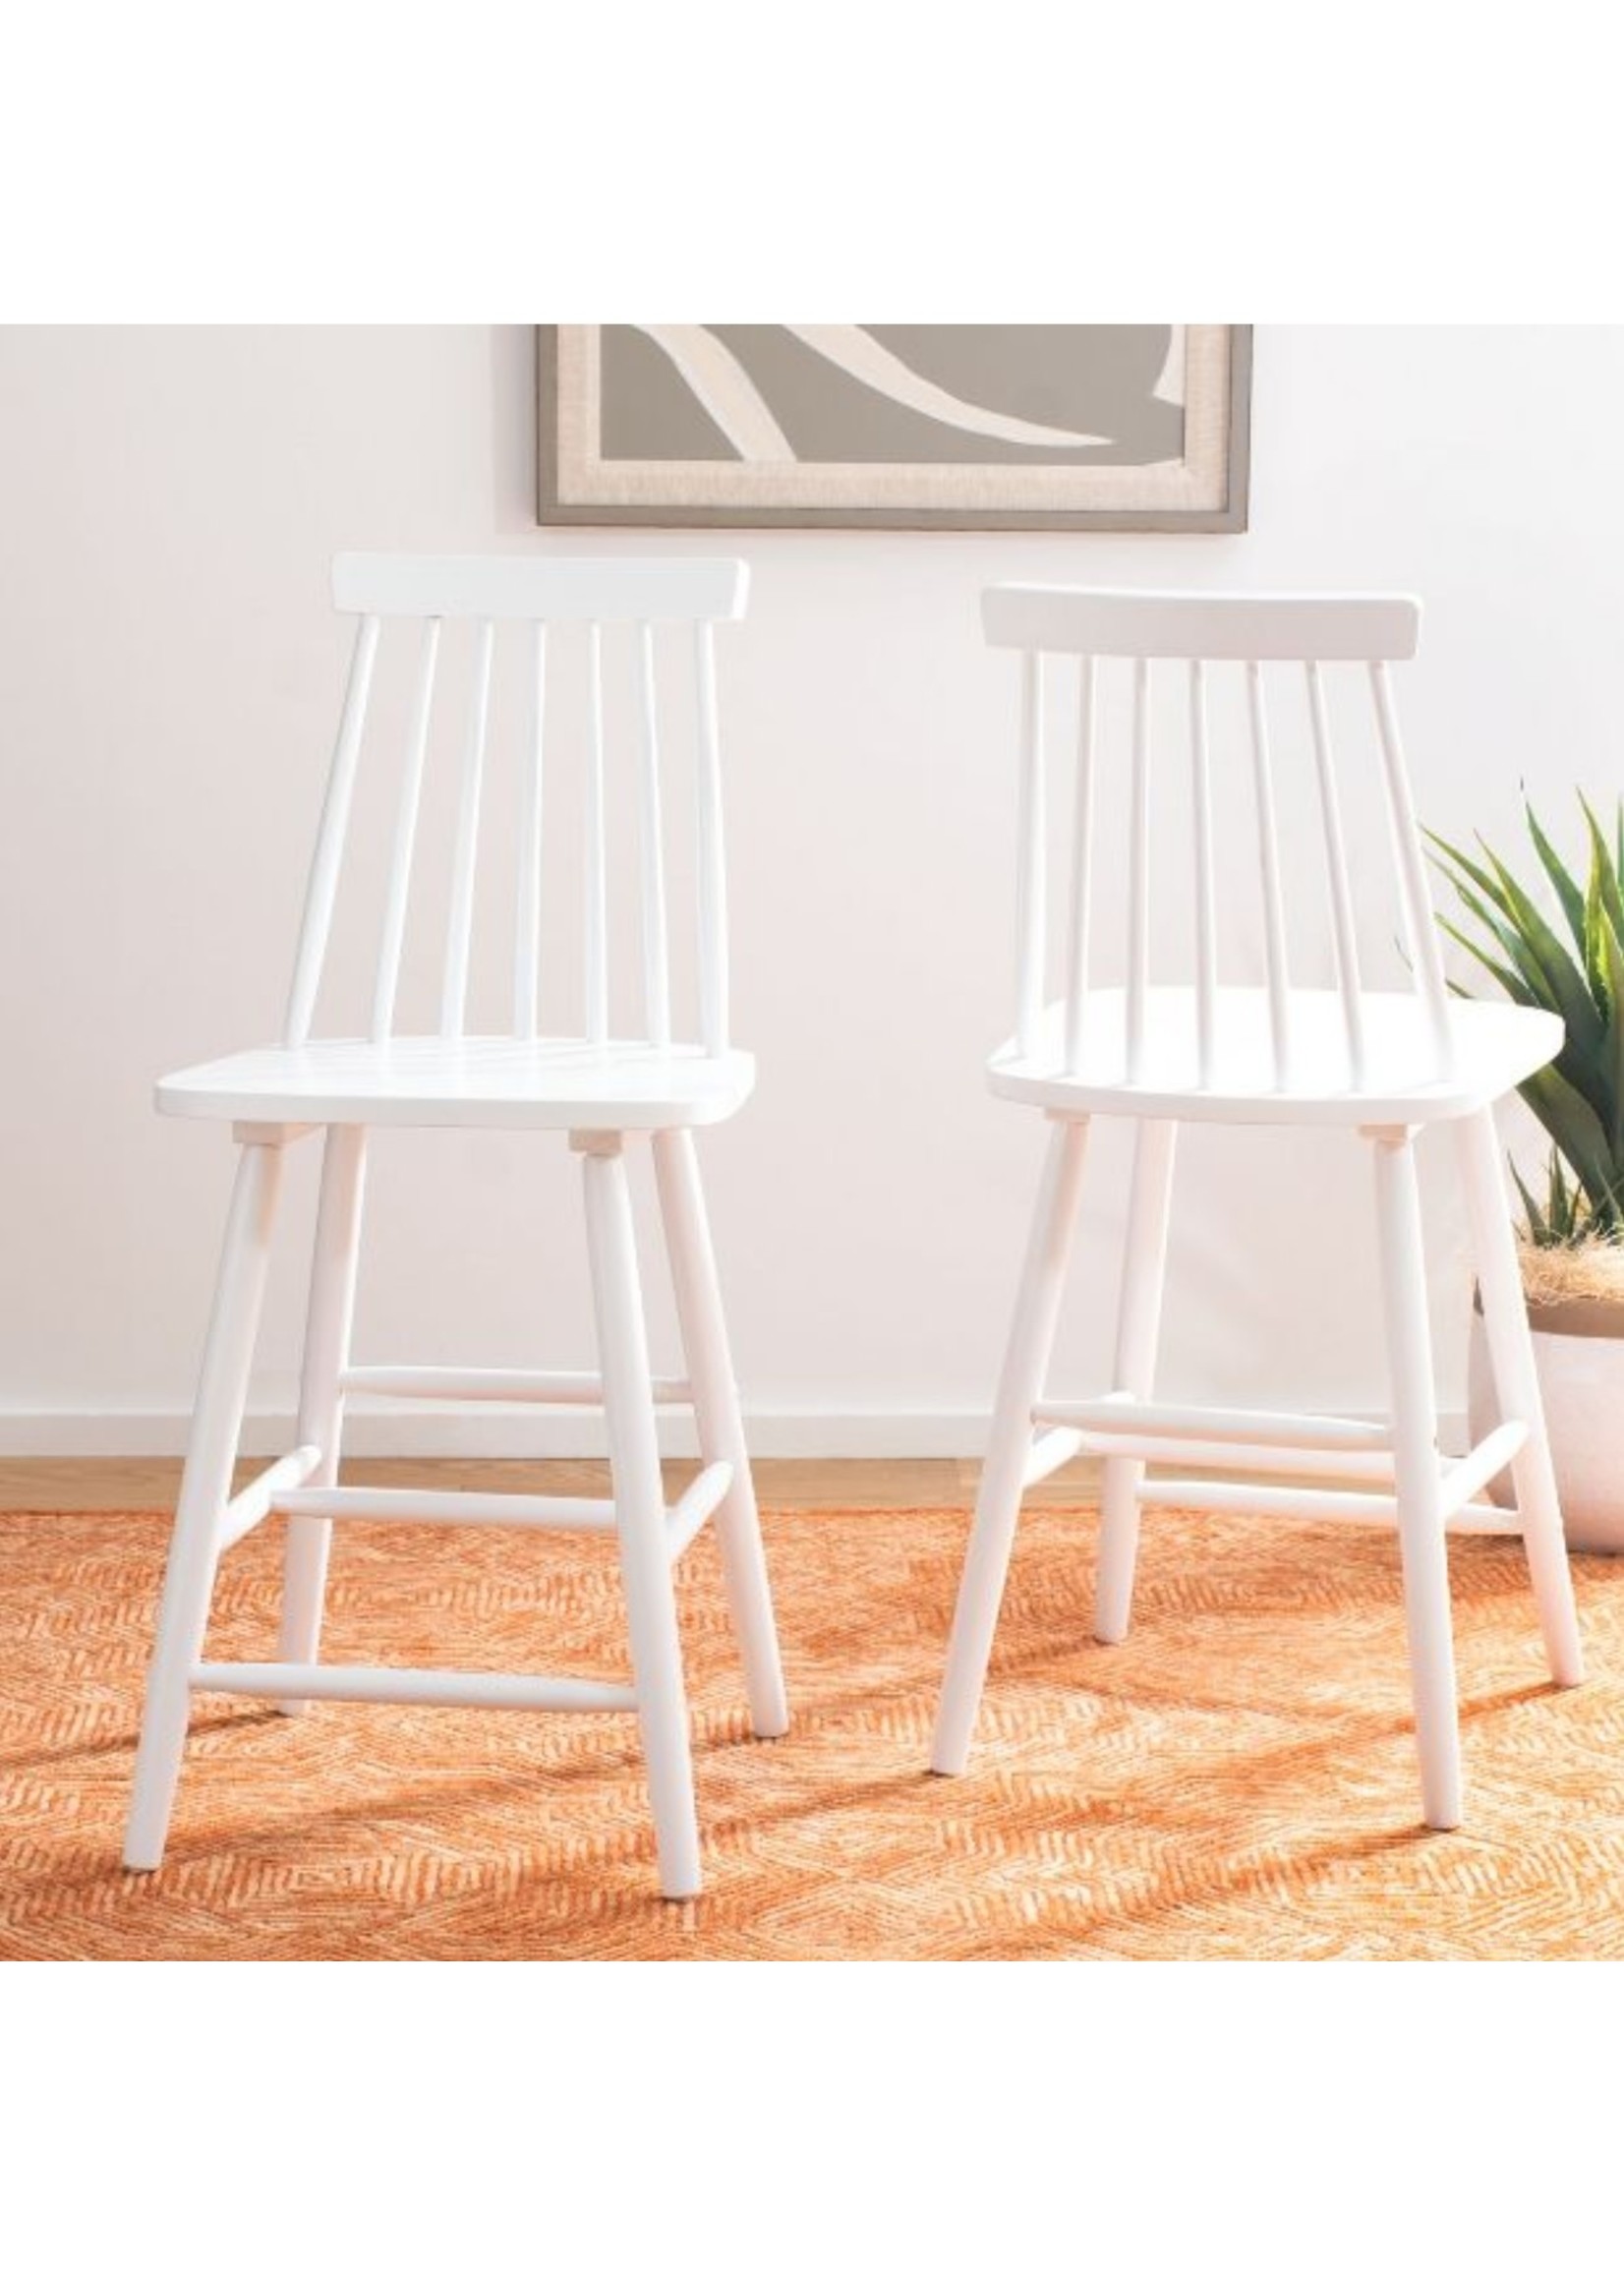 Safavieh Country Classic Spindle Back Off-White Dining Chairs Set of 2